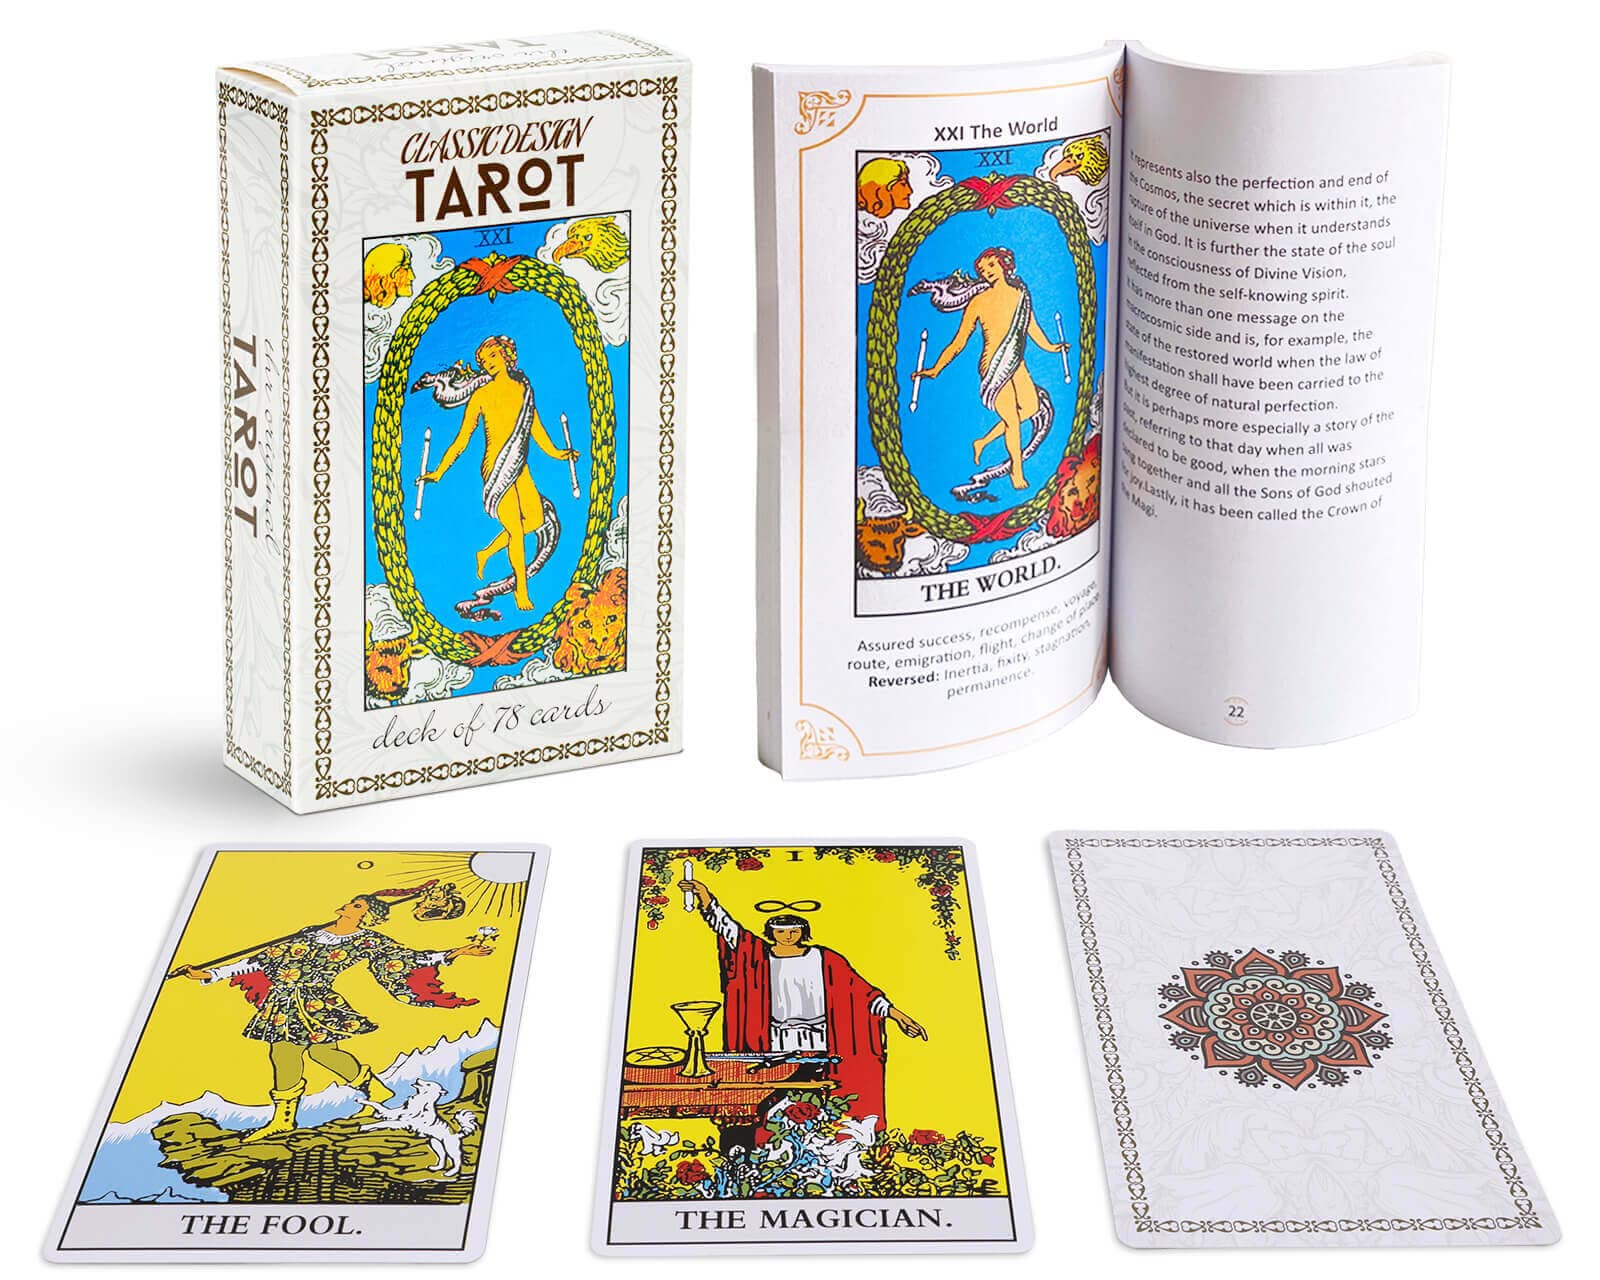 This Beautifully Illustrated Tarot Deck Features Malcolm X, Tina Turner, and Other Black Icons